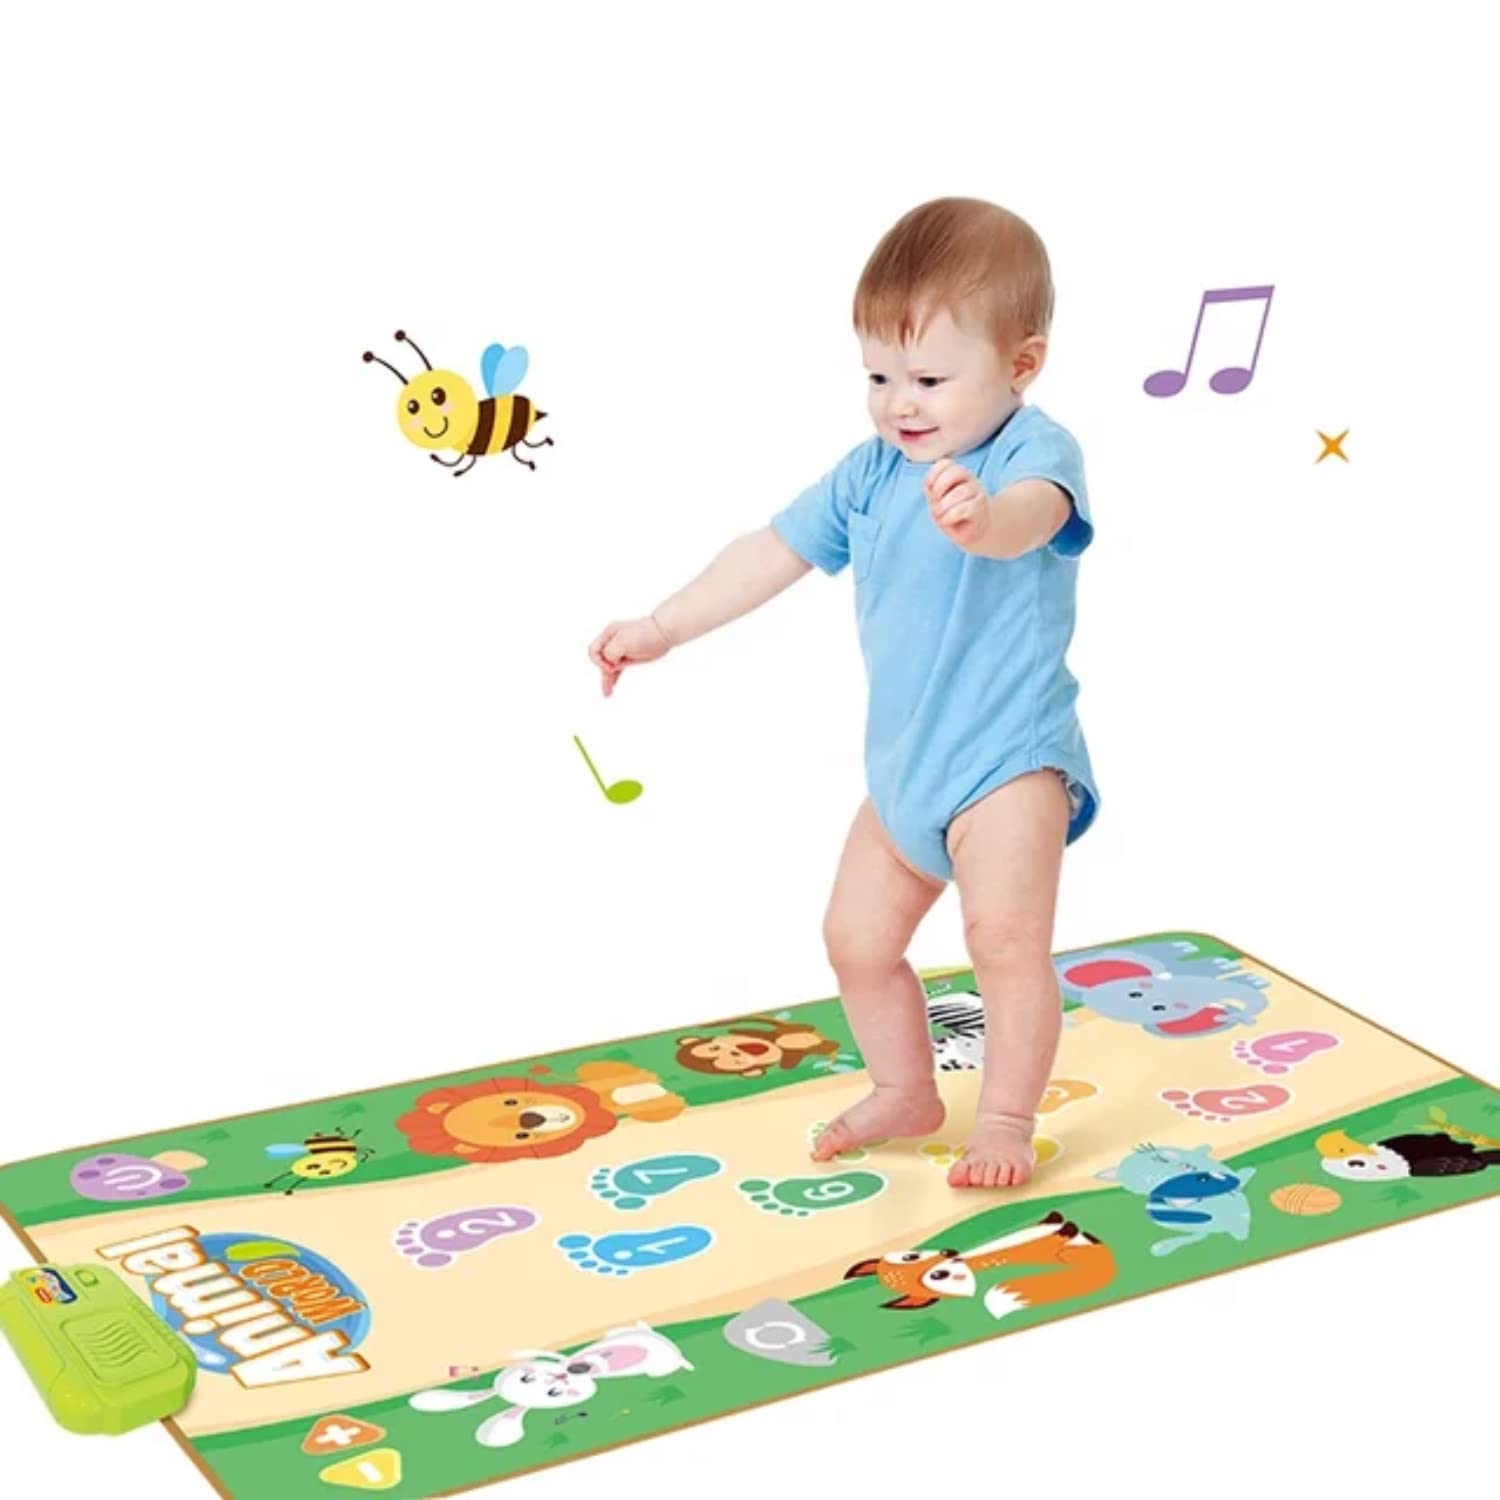 Baby Musical Mats with Music Sounds, Learning Toys Child Floor Piano Keyboard Mat Carpet Animal Early Education Toys for Baby Girls Boys Toddlers (1 to 5 Years Old)